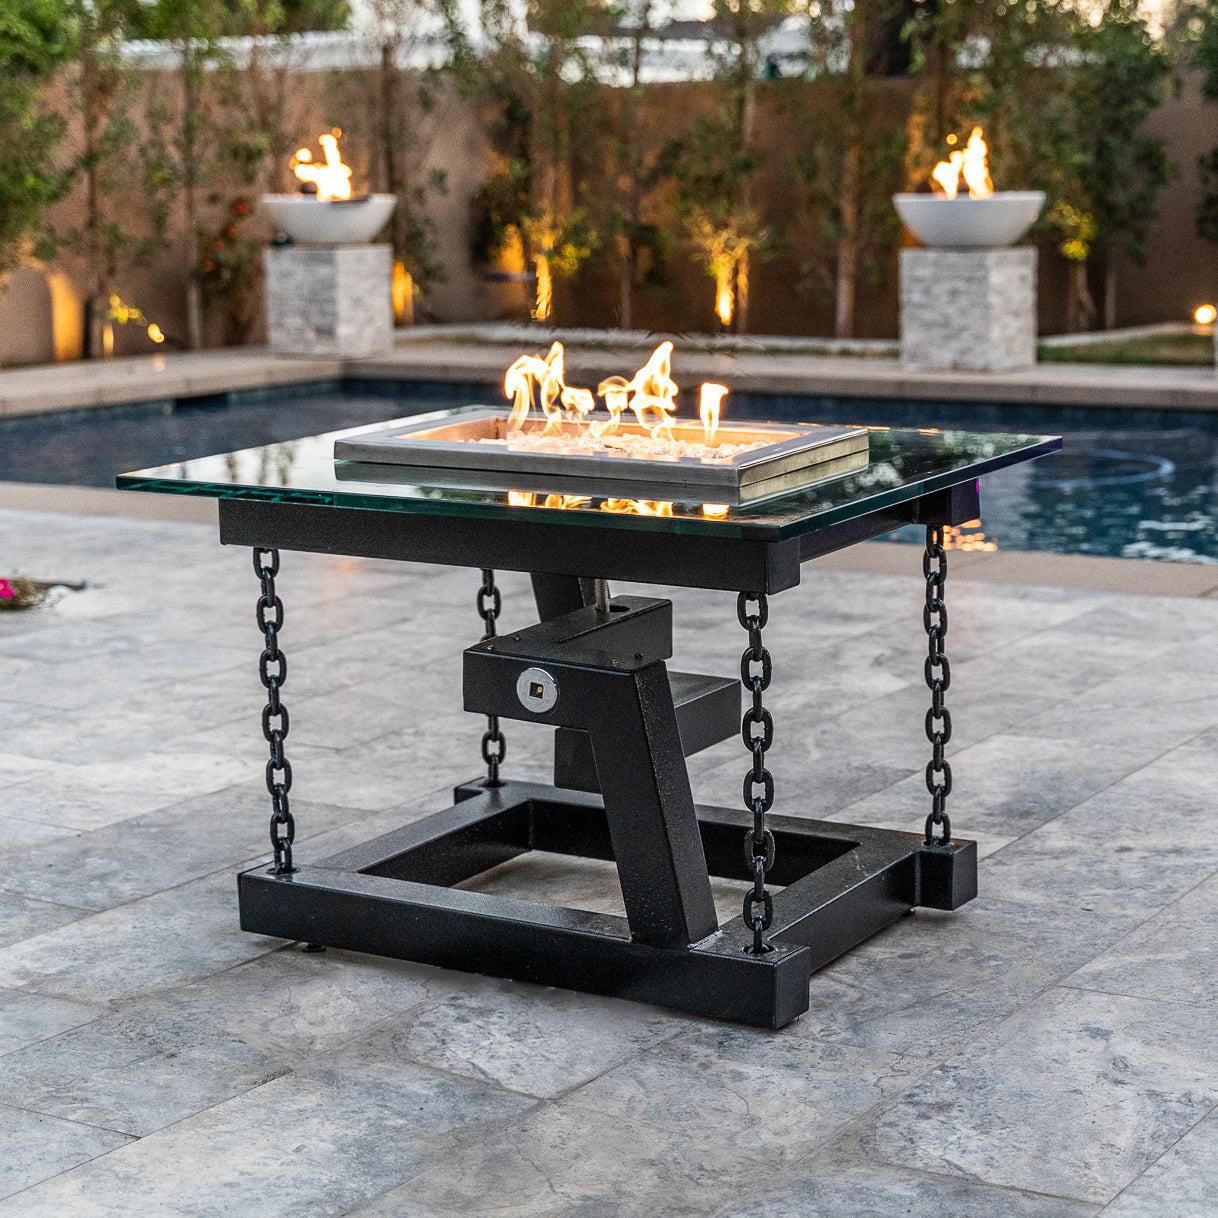 The Outdoor Plus Newton 52" Java Powder Coated Metal Liquid Propane Fire Pit with Chain Support & Match Lit Ignition